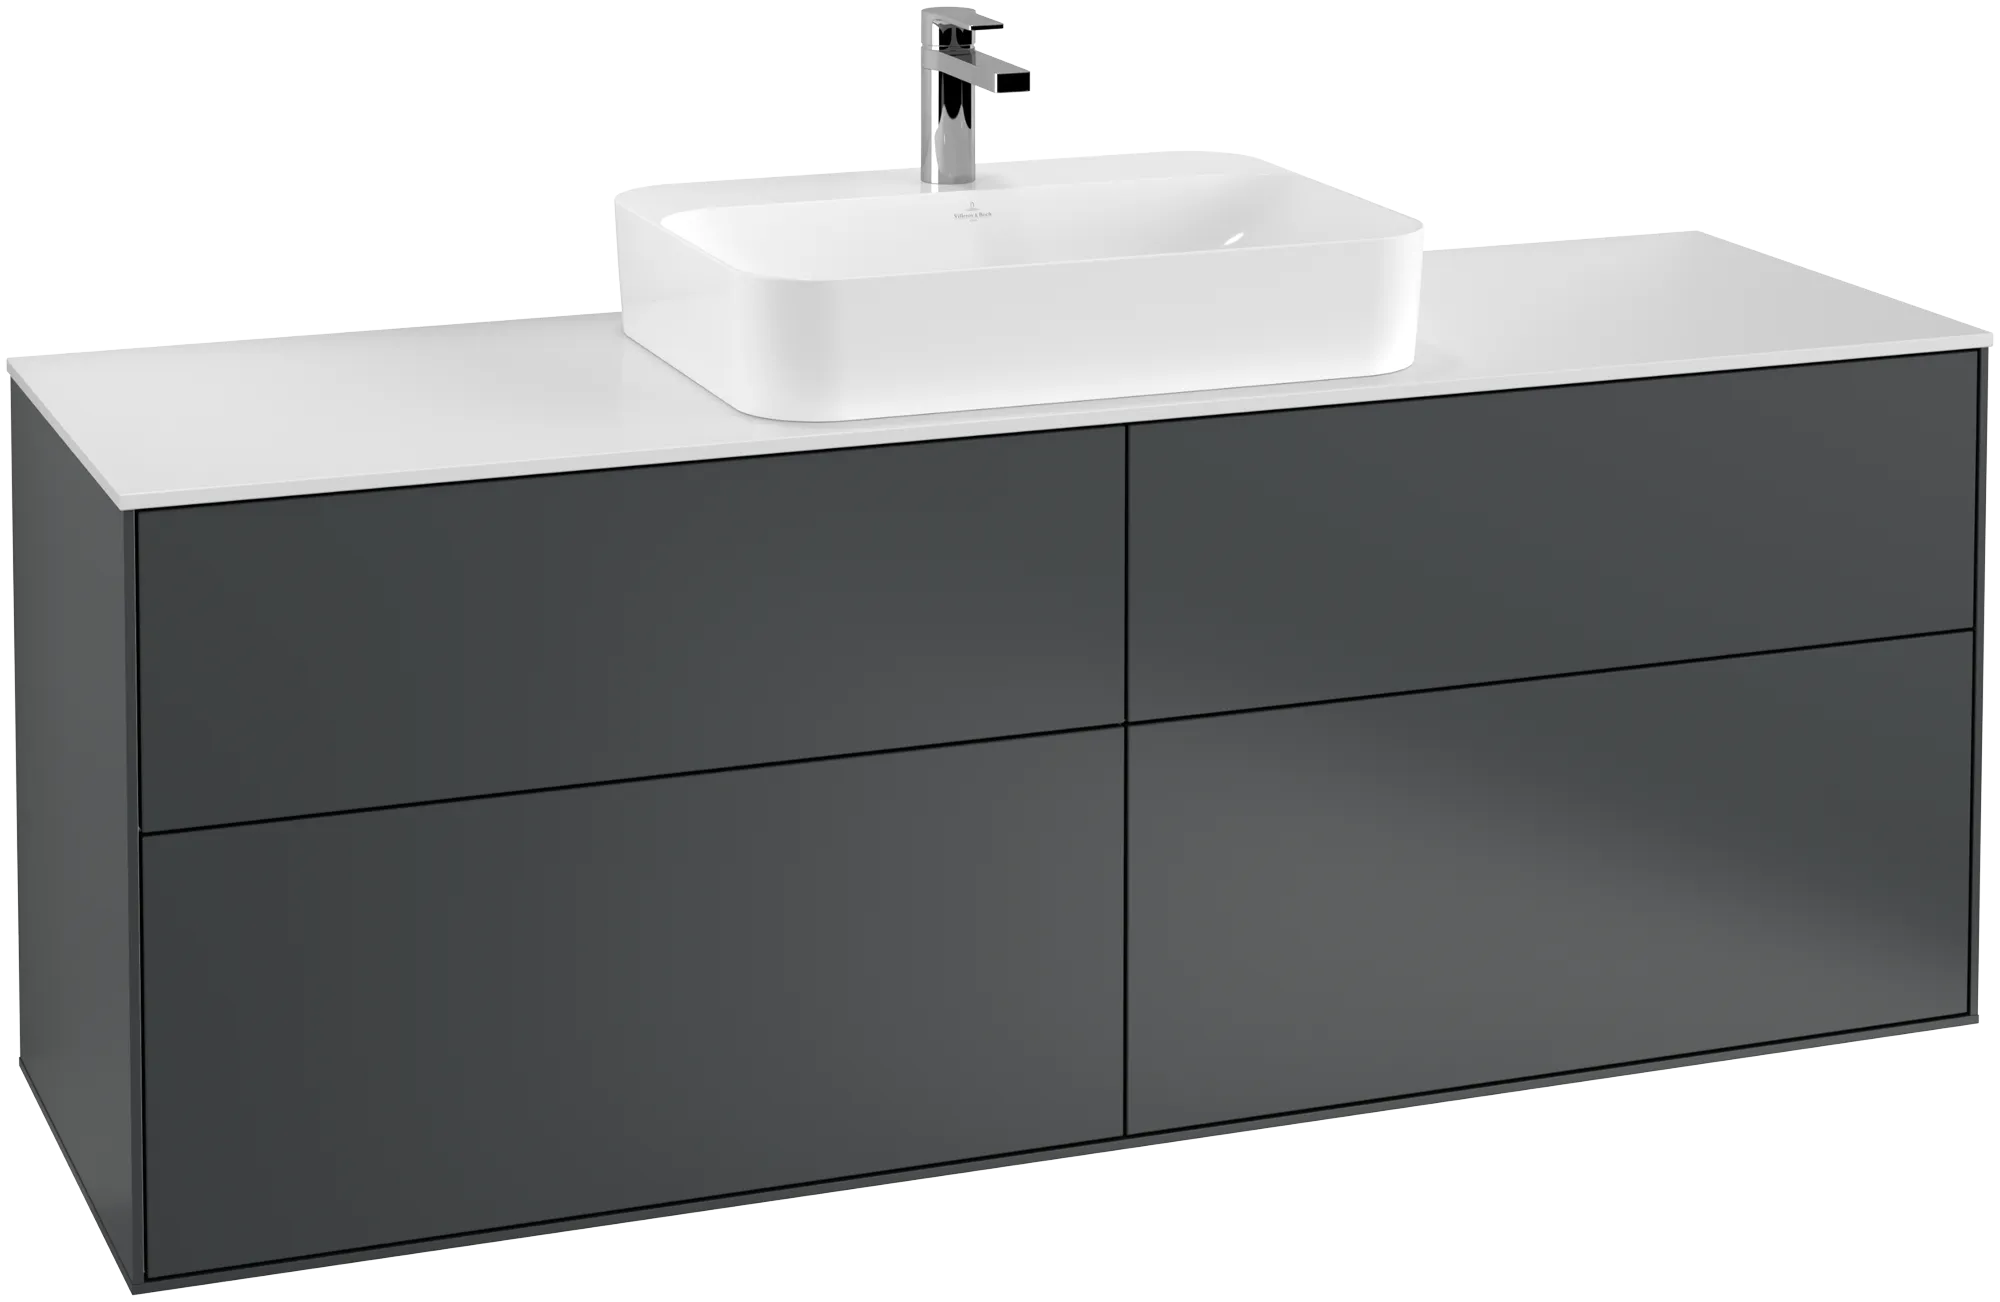 Picture of VILLEROY BOCH Finion Vanity unit, with lighting, 4 pull-out compartments, 1600 x 603 x 501 mm, Midnight Blue Matt Lacquer / Glass White Matt #G44100HG